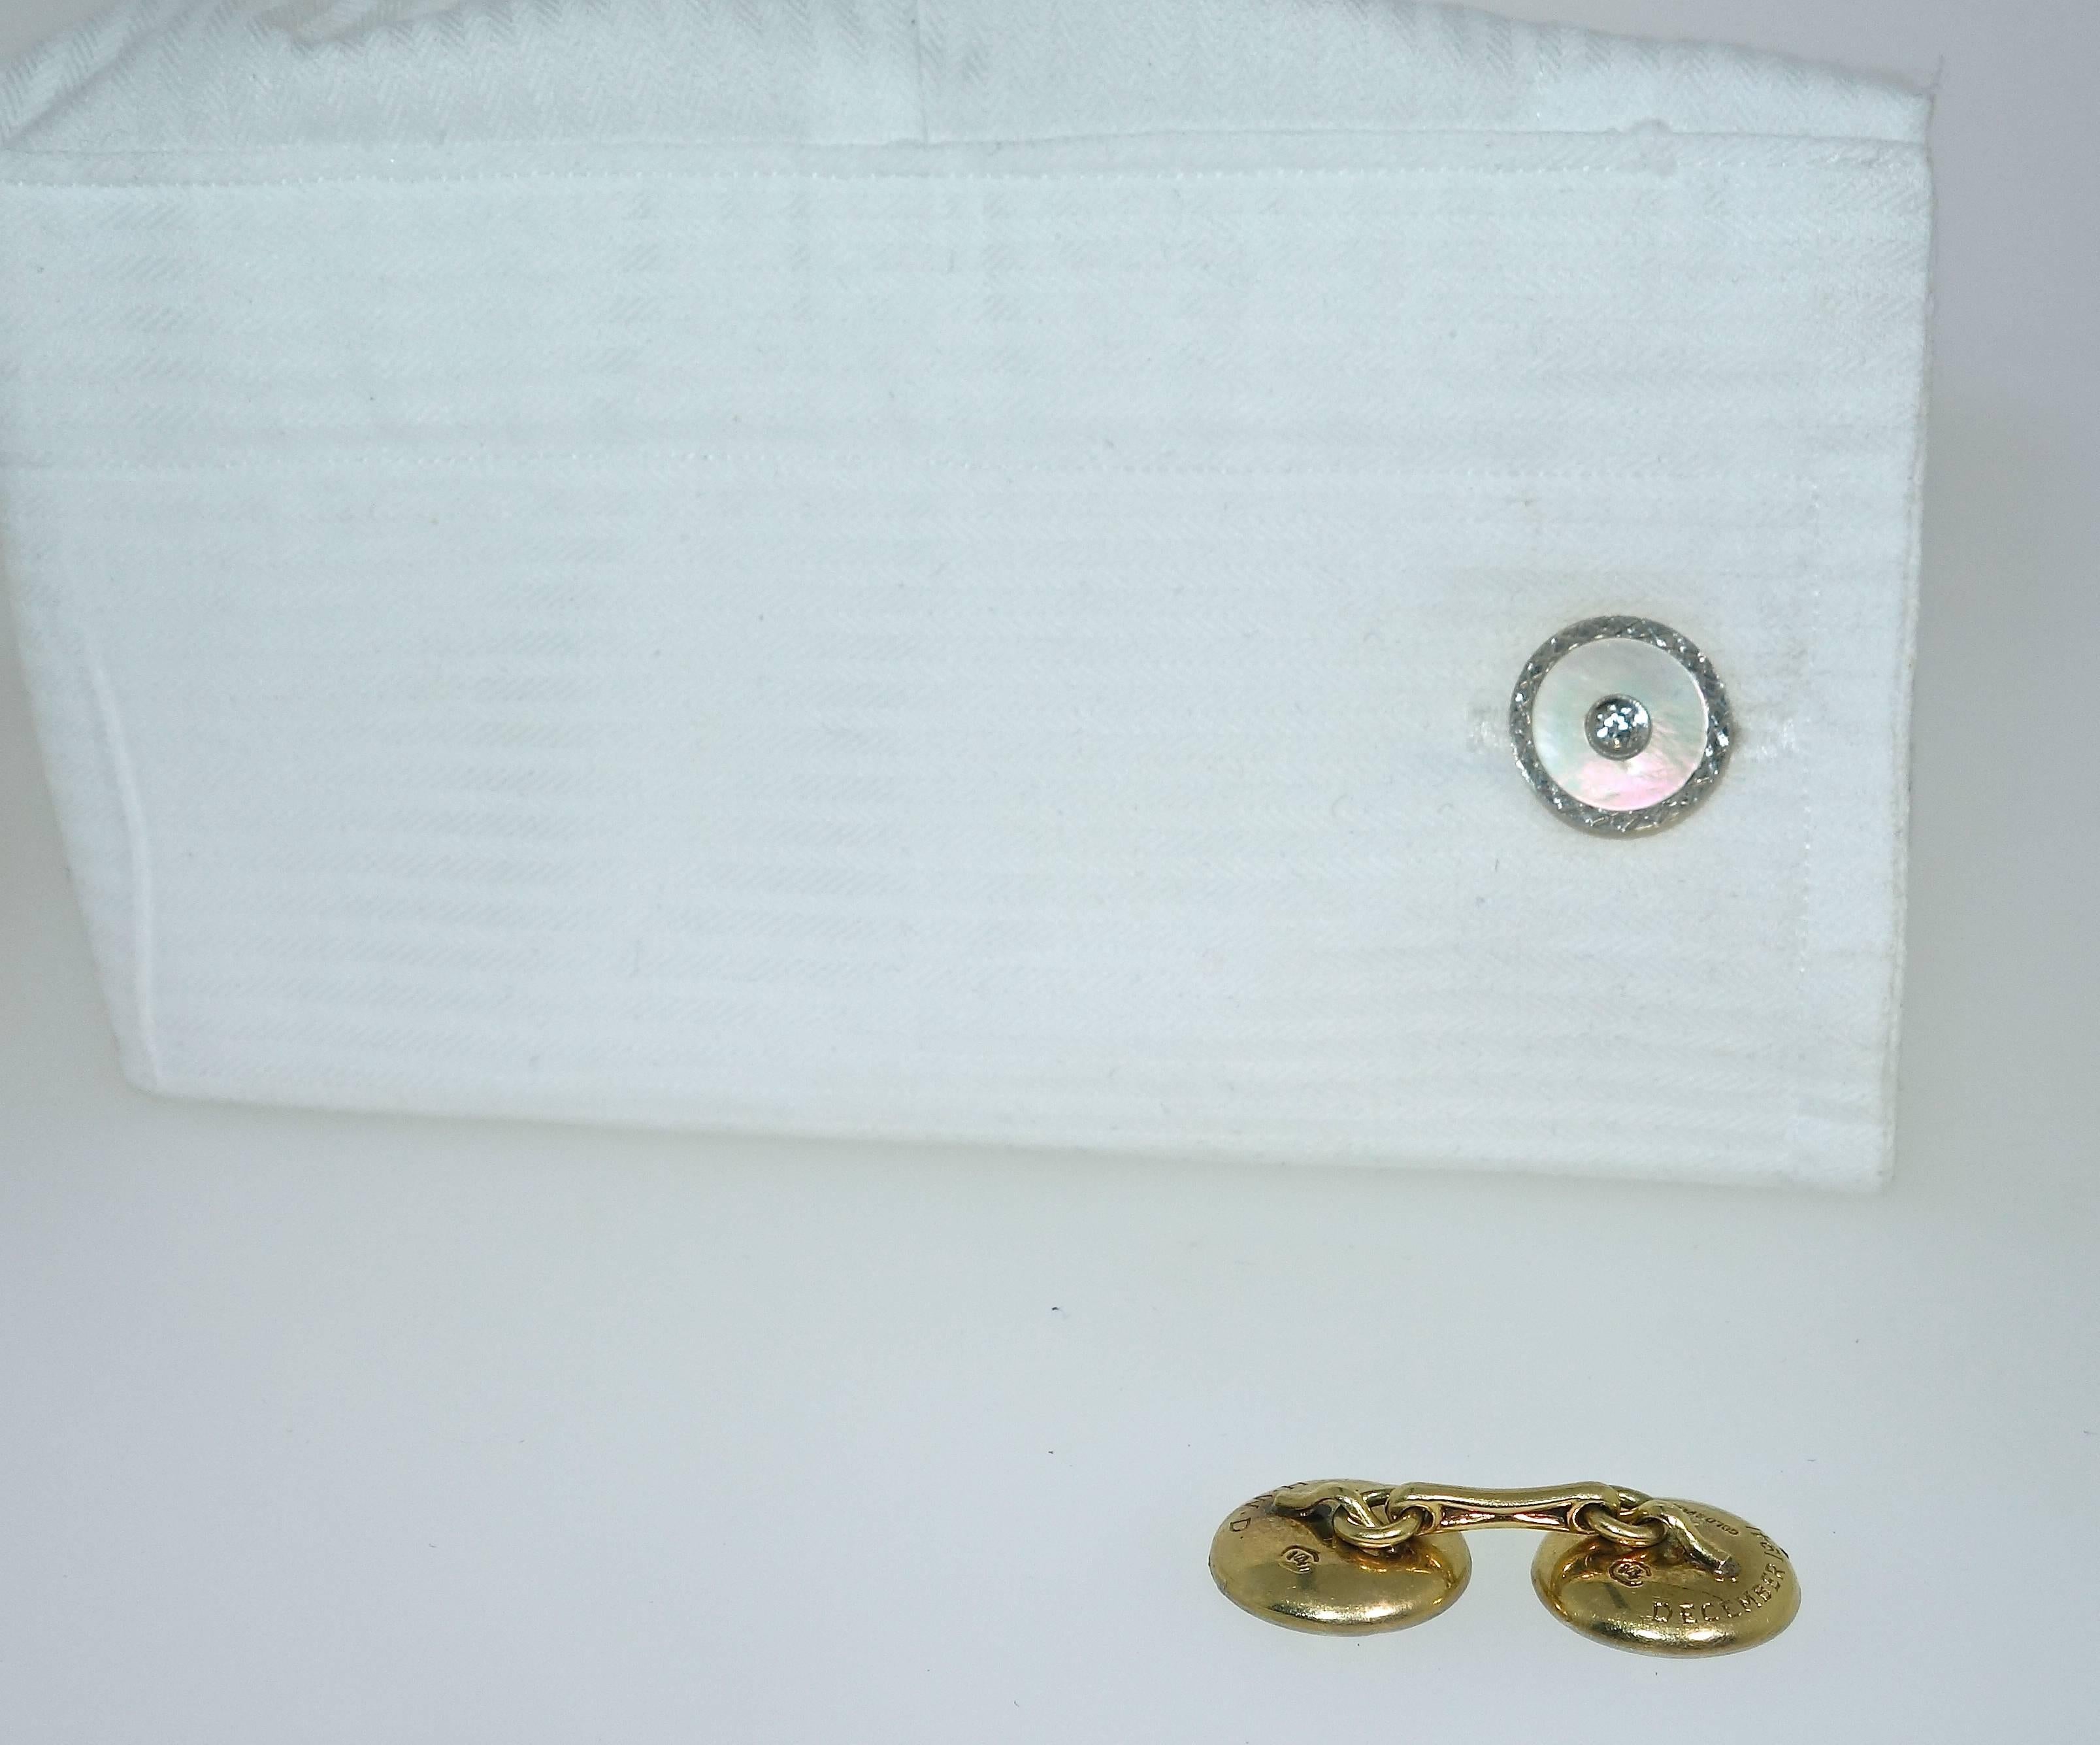 Old European Cut Cufflinks with Diamond and Mother of Pearl in Platinum, Carrington, circa 1920